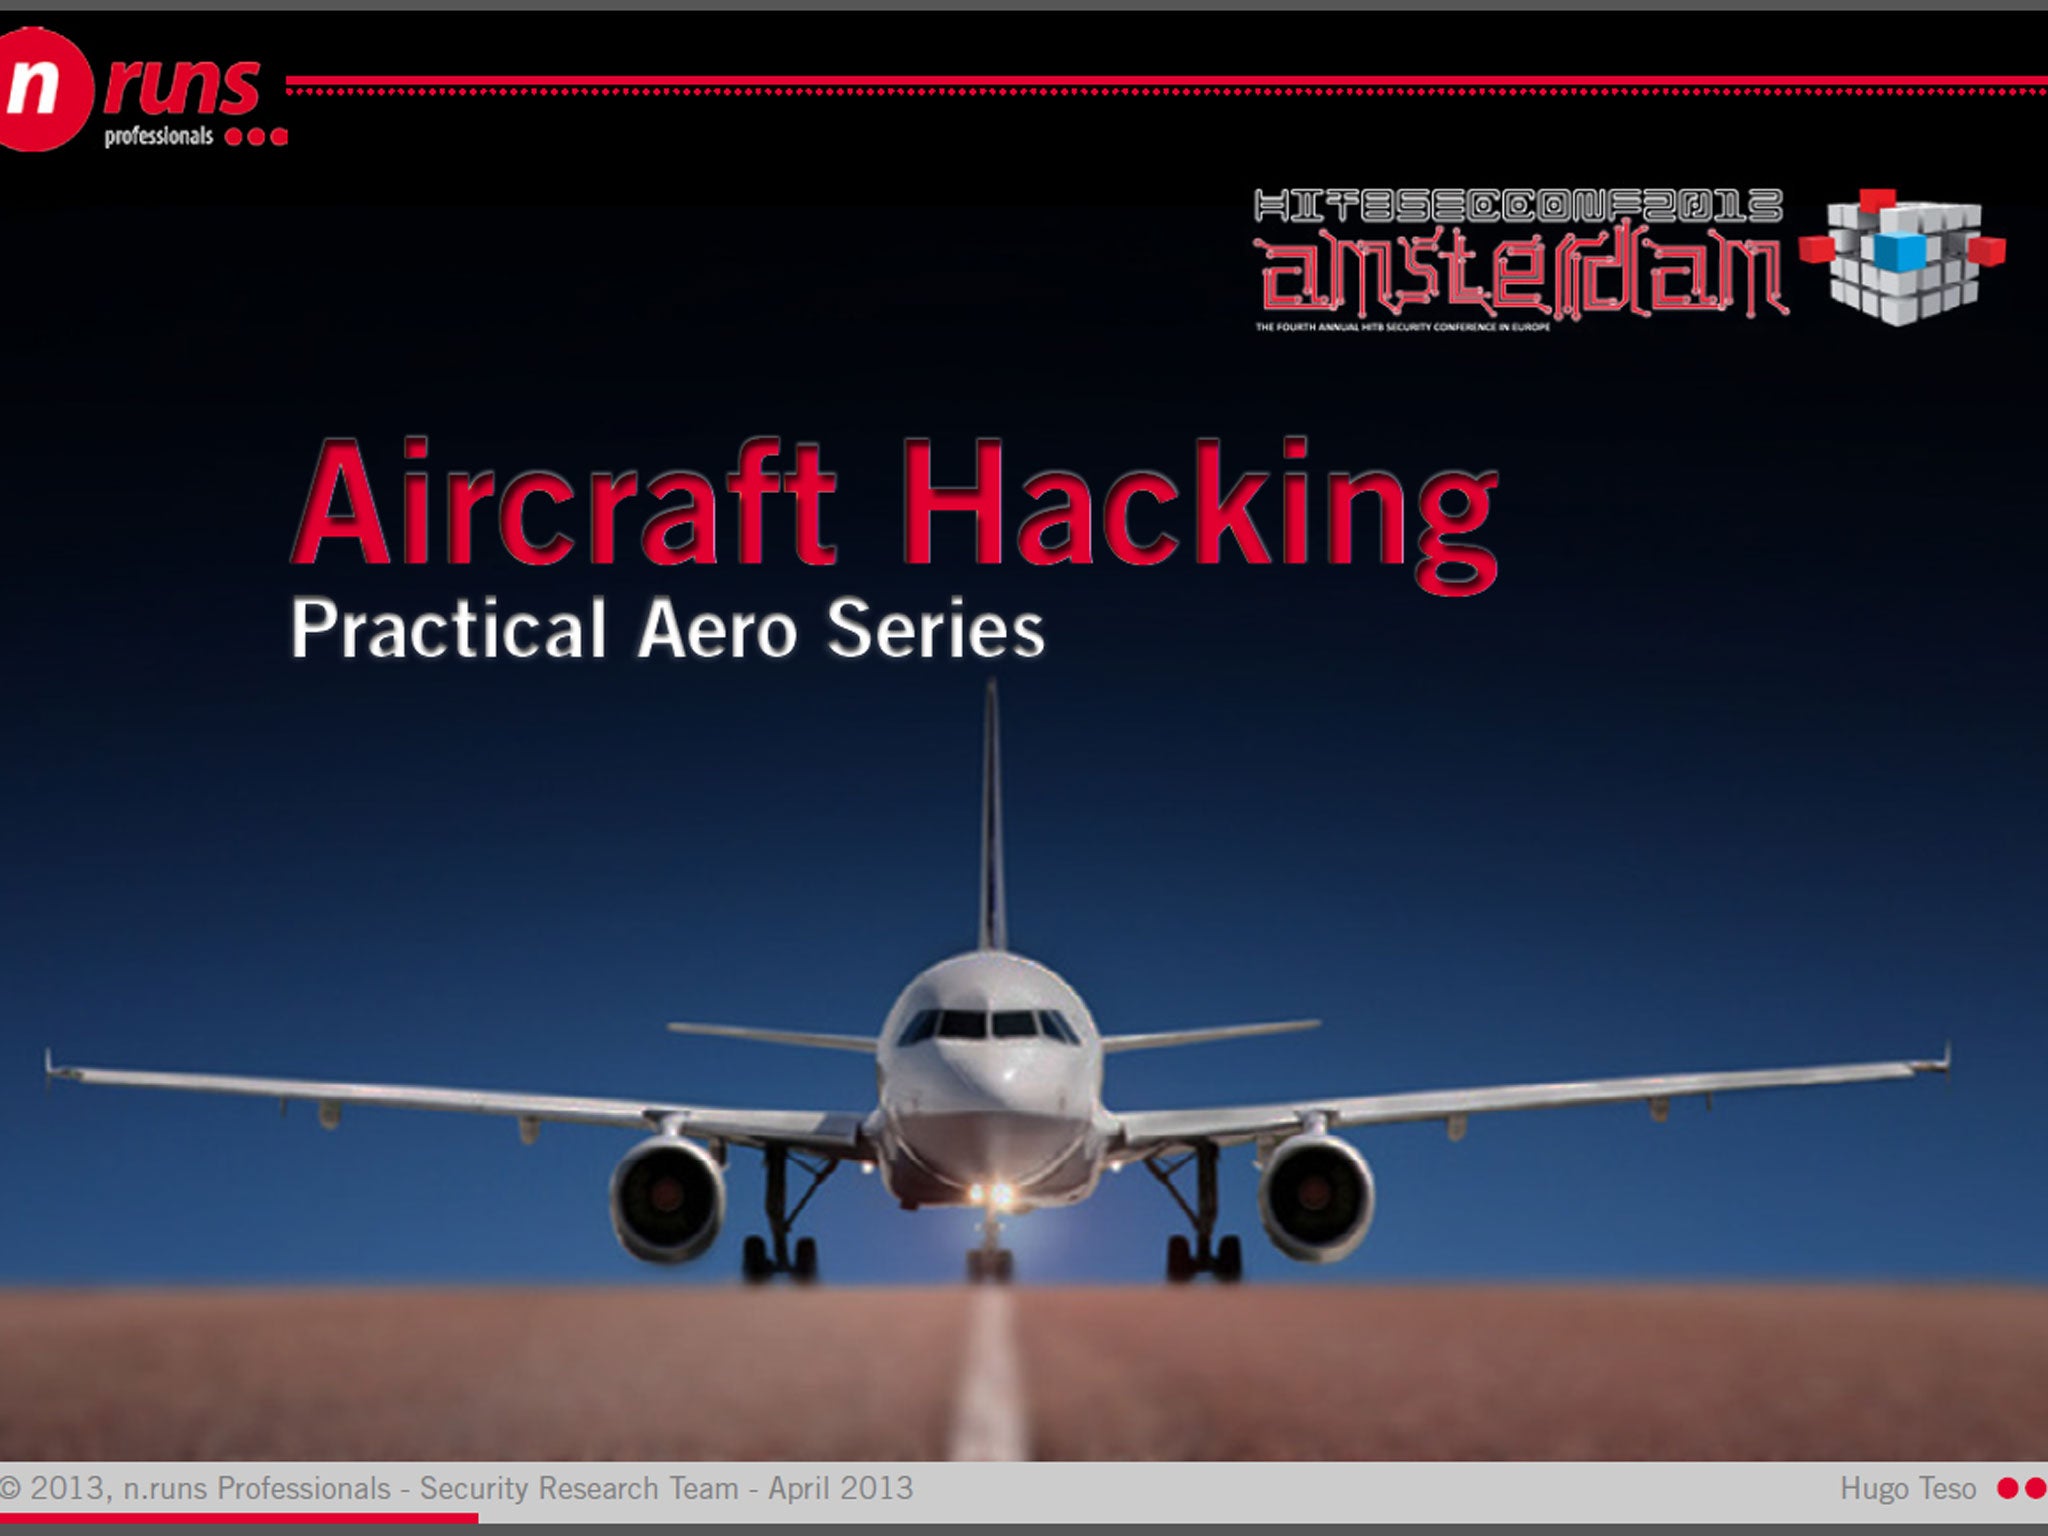 A presentation slide from Hugo Teso's Aircraft Hacking talk at Hack In The Box